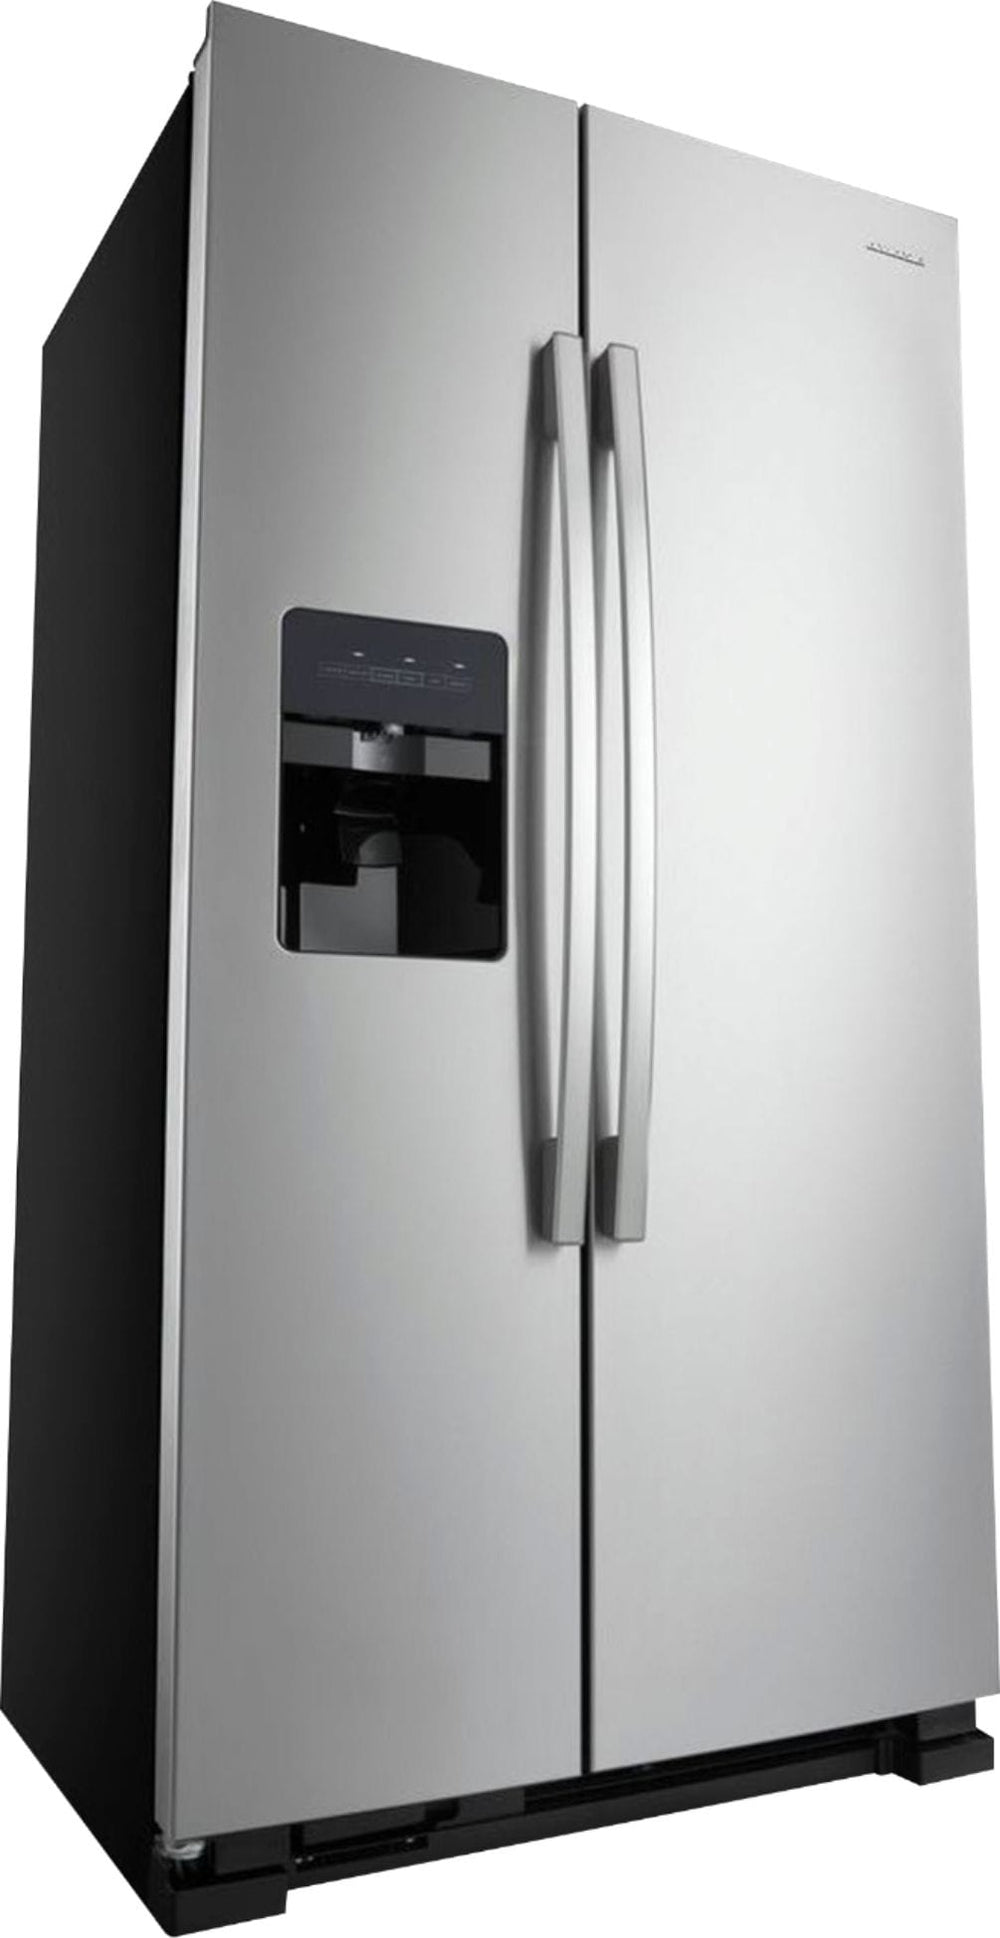 Amana - 24.5 Cu. Ft. Side-by-Side Refrigerator with Water and Ice Dispenser - Stainless steel_1